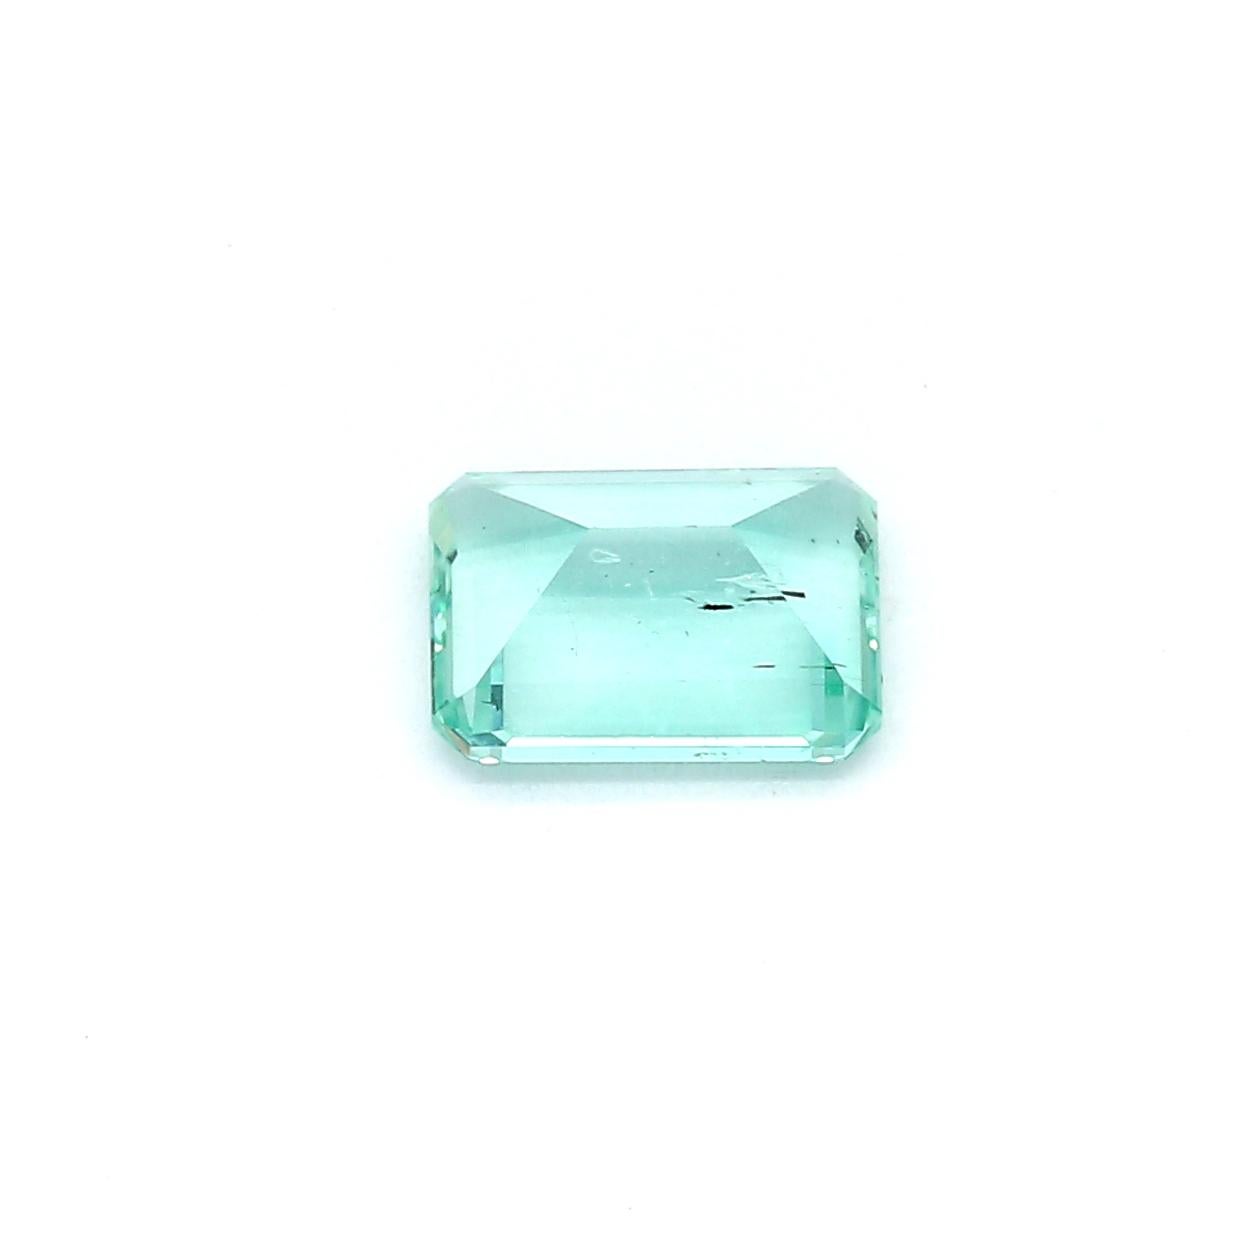 Russian Emeralds are known for their beautiful neon green color and excellent clarity. 
This 1.38 ct Emerald has a classic emerald cut which allows jewelers to create a unique piece of wearable art.


Shape - Octagon
Weight - 1.38 ct
Treatment -